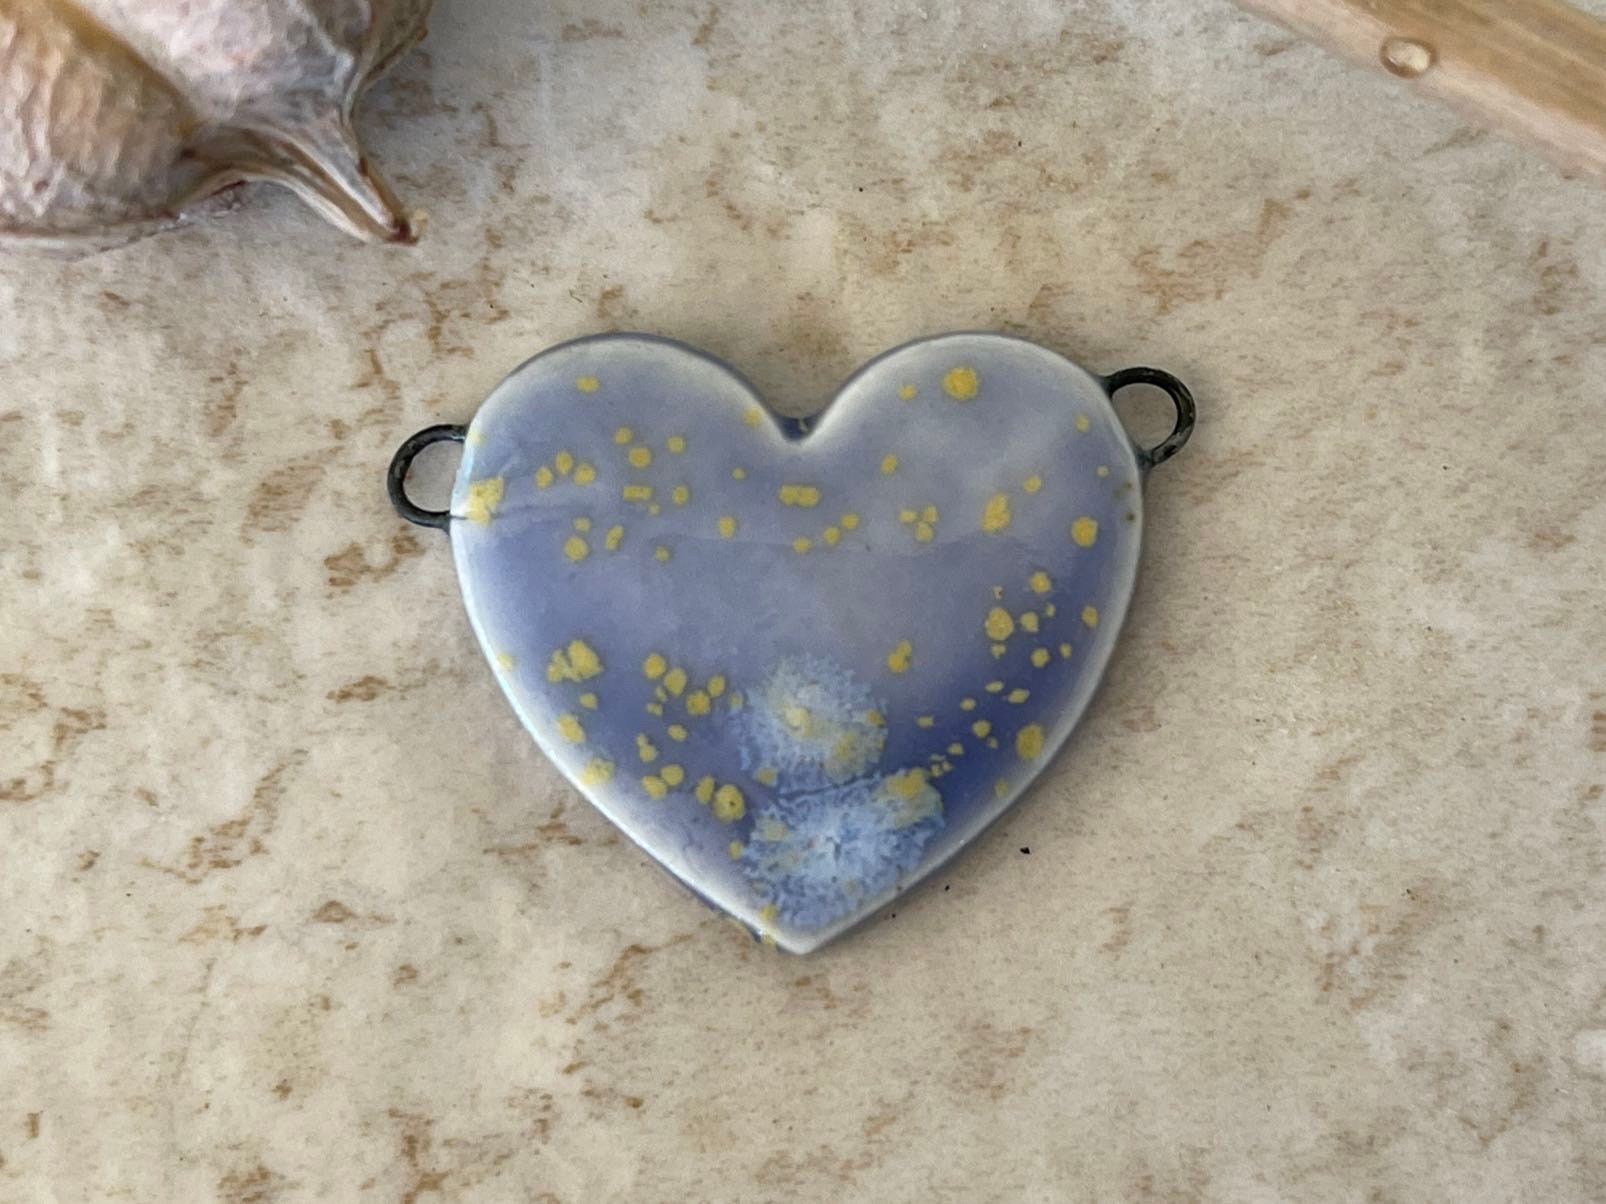 Blue Heart Pendant with Gold Flecks, Double Wire Heart Pendant, Porcelain Ceramic Pendant, Artisan Pendant, Jewelry Making Components